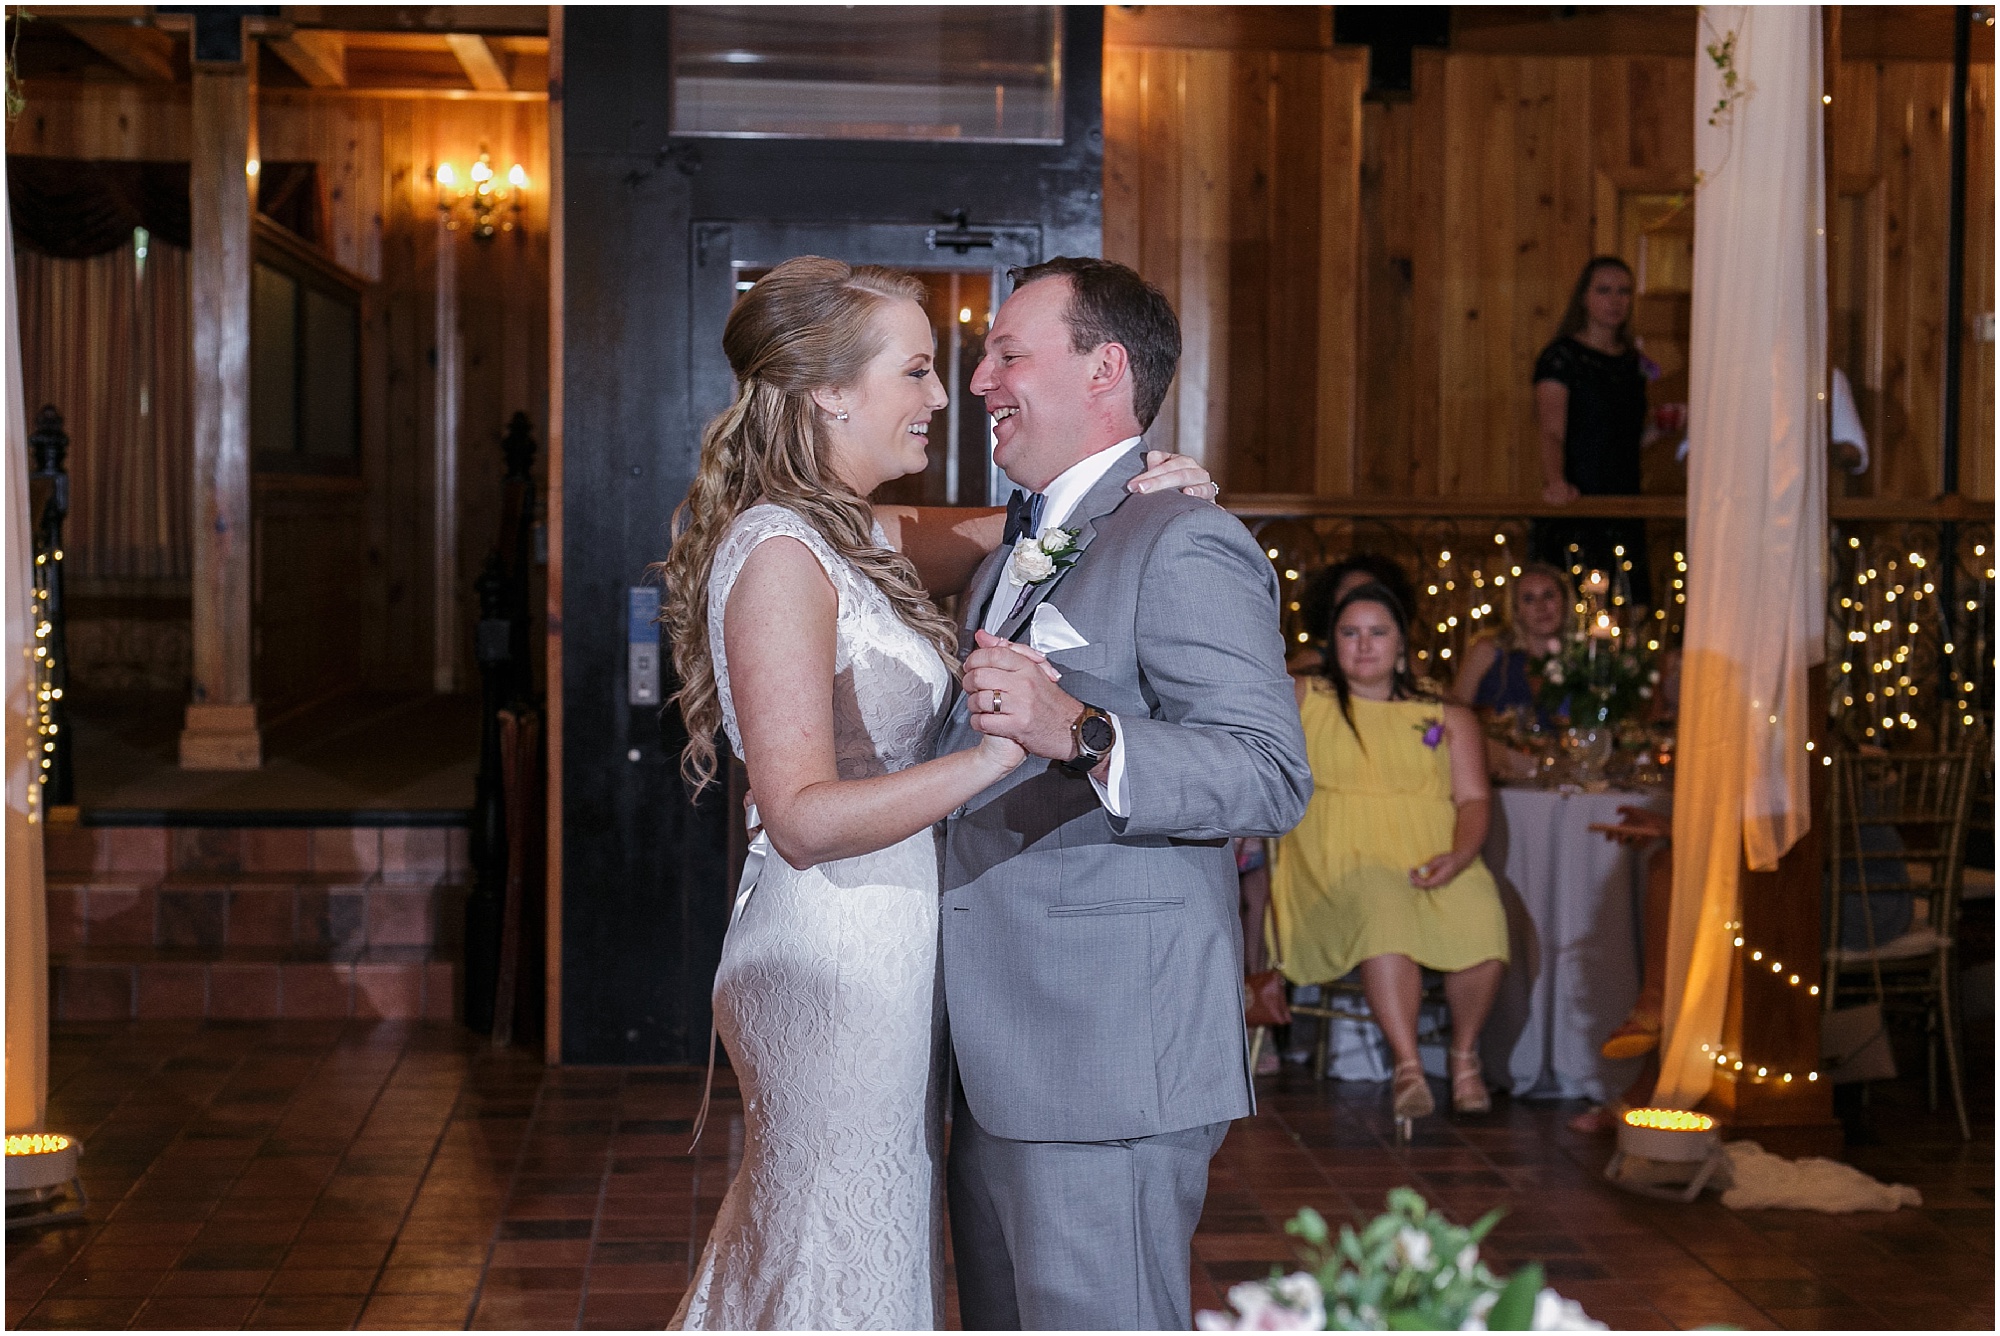 Newlyweds share their first dance as a married couple.